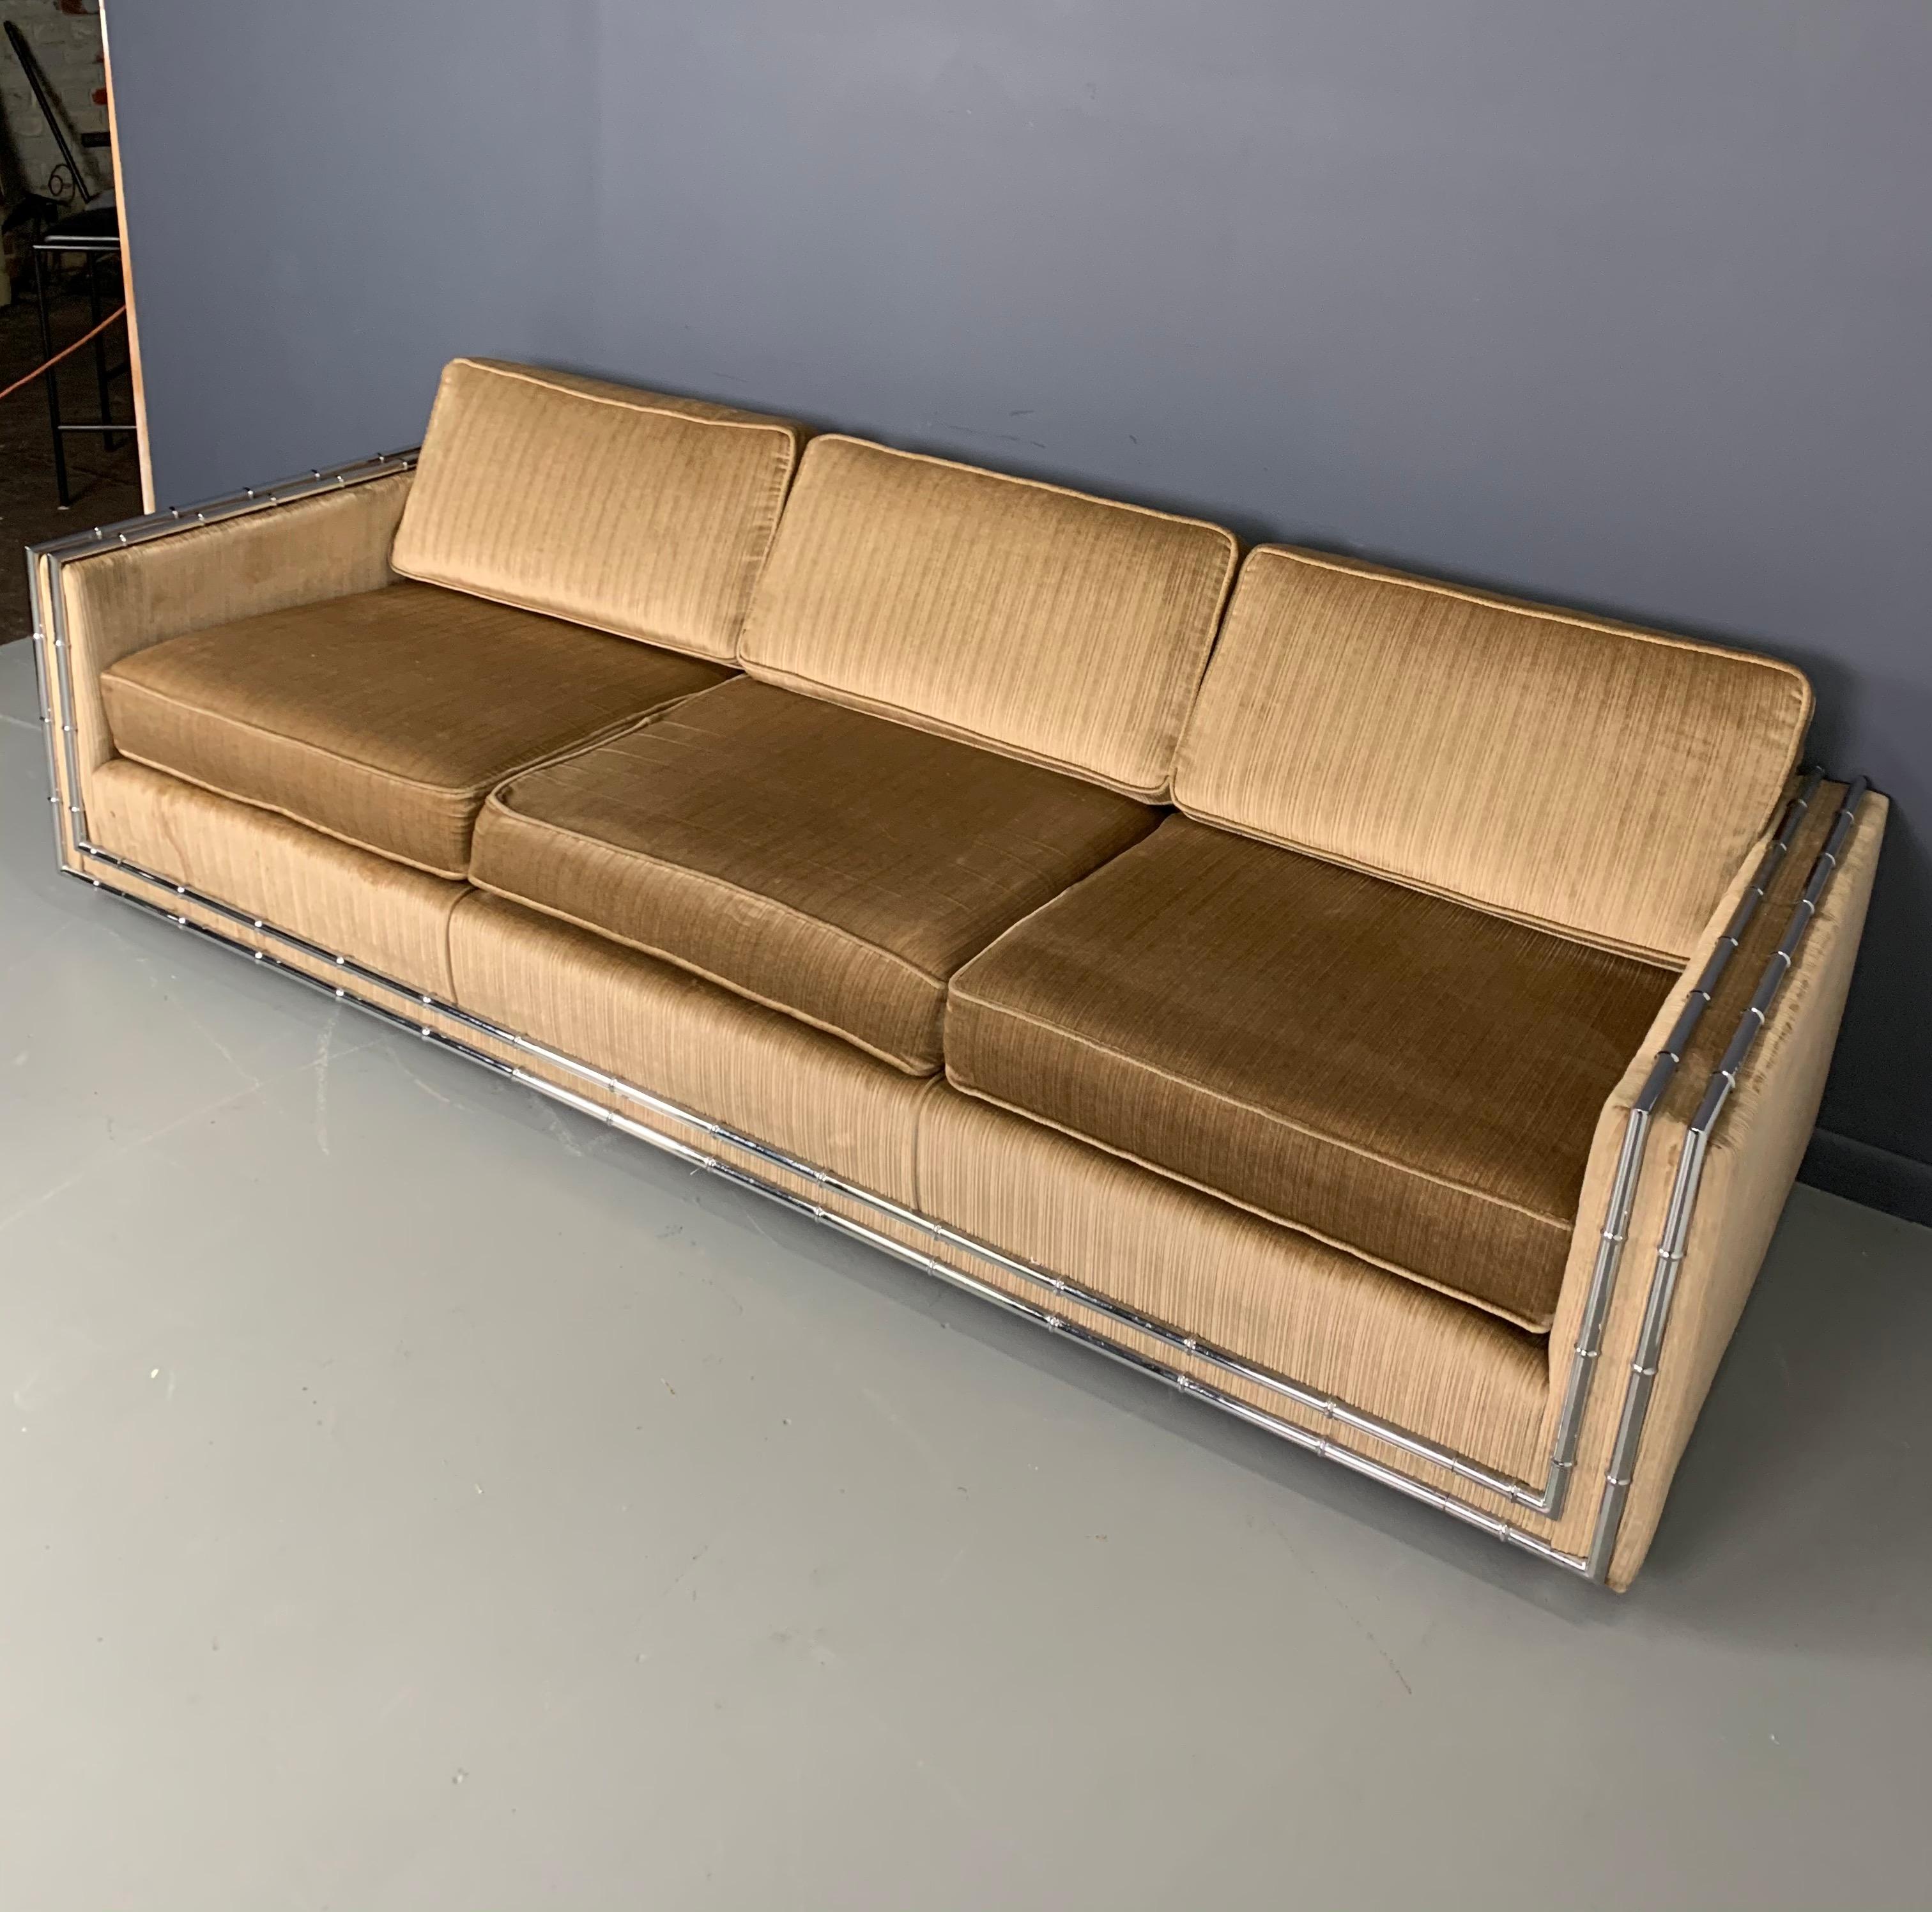 Generously sized sofa with a very cool double chromed bamboo frame.